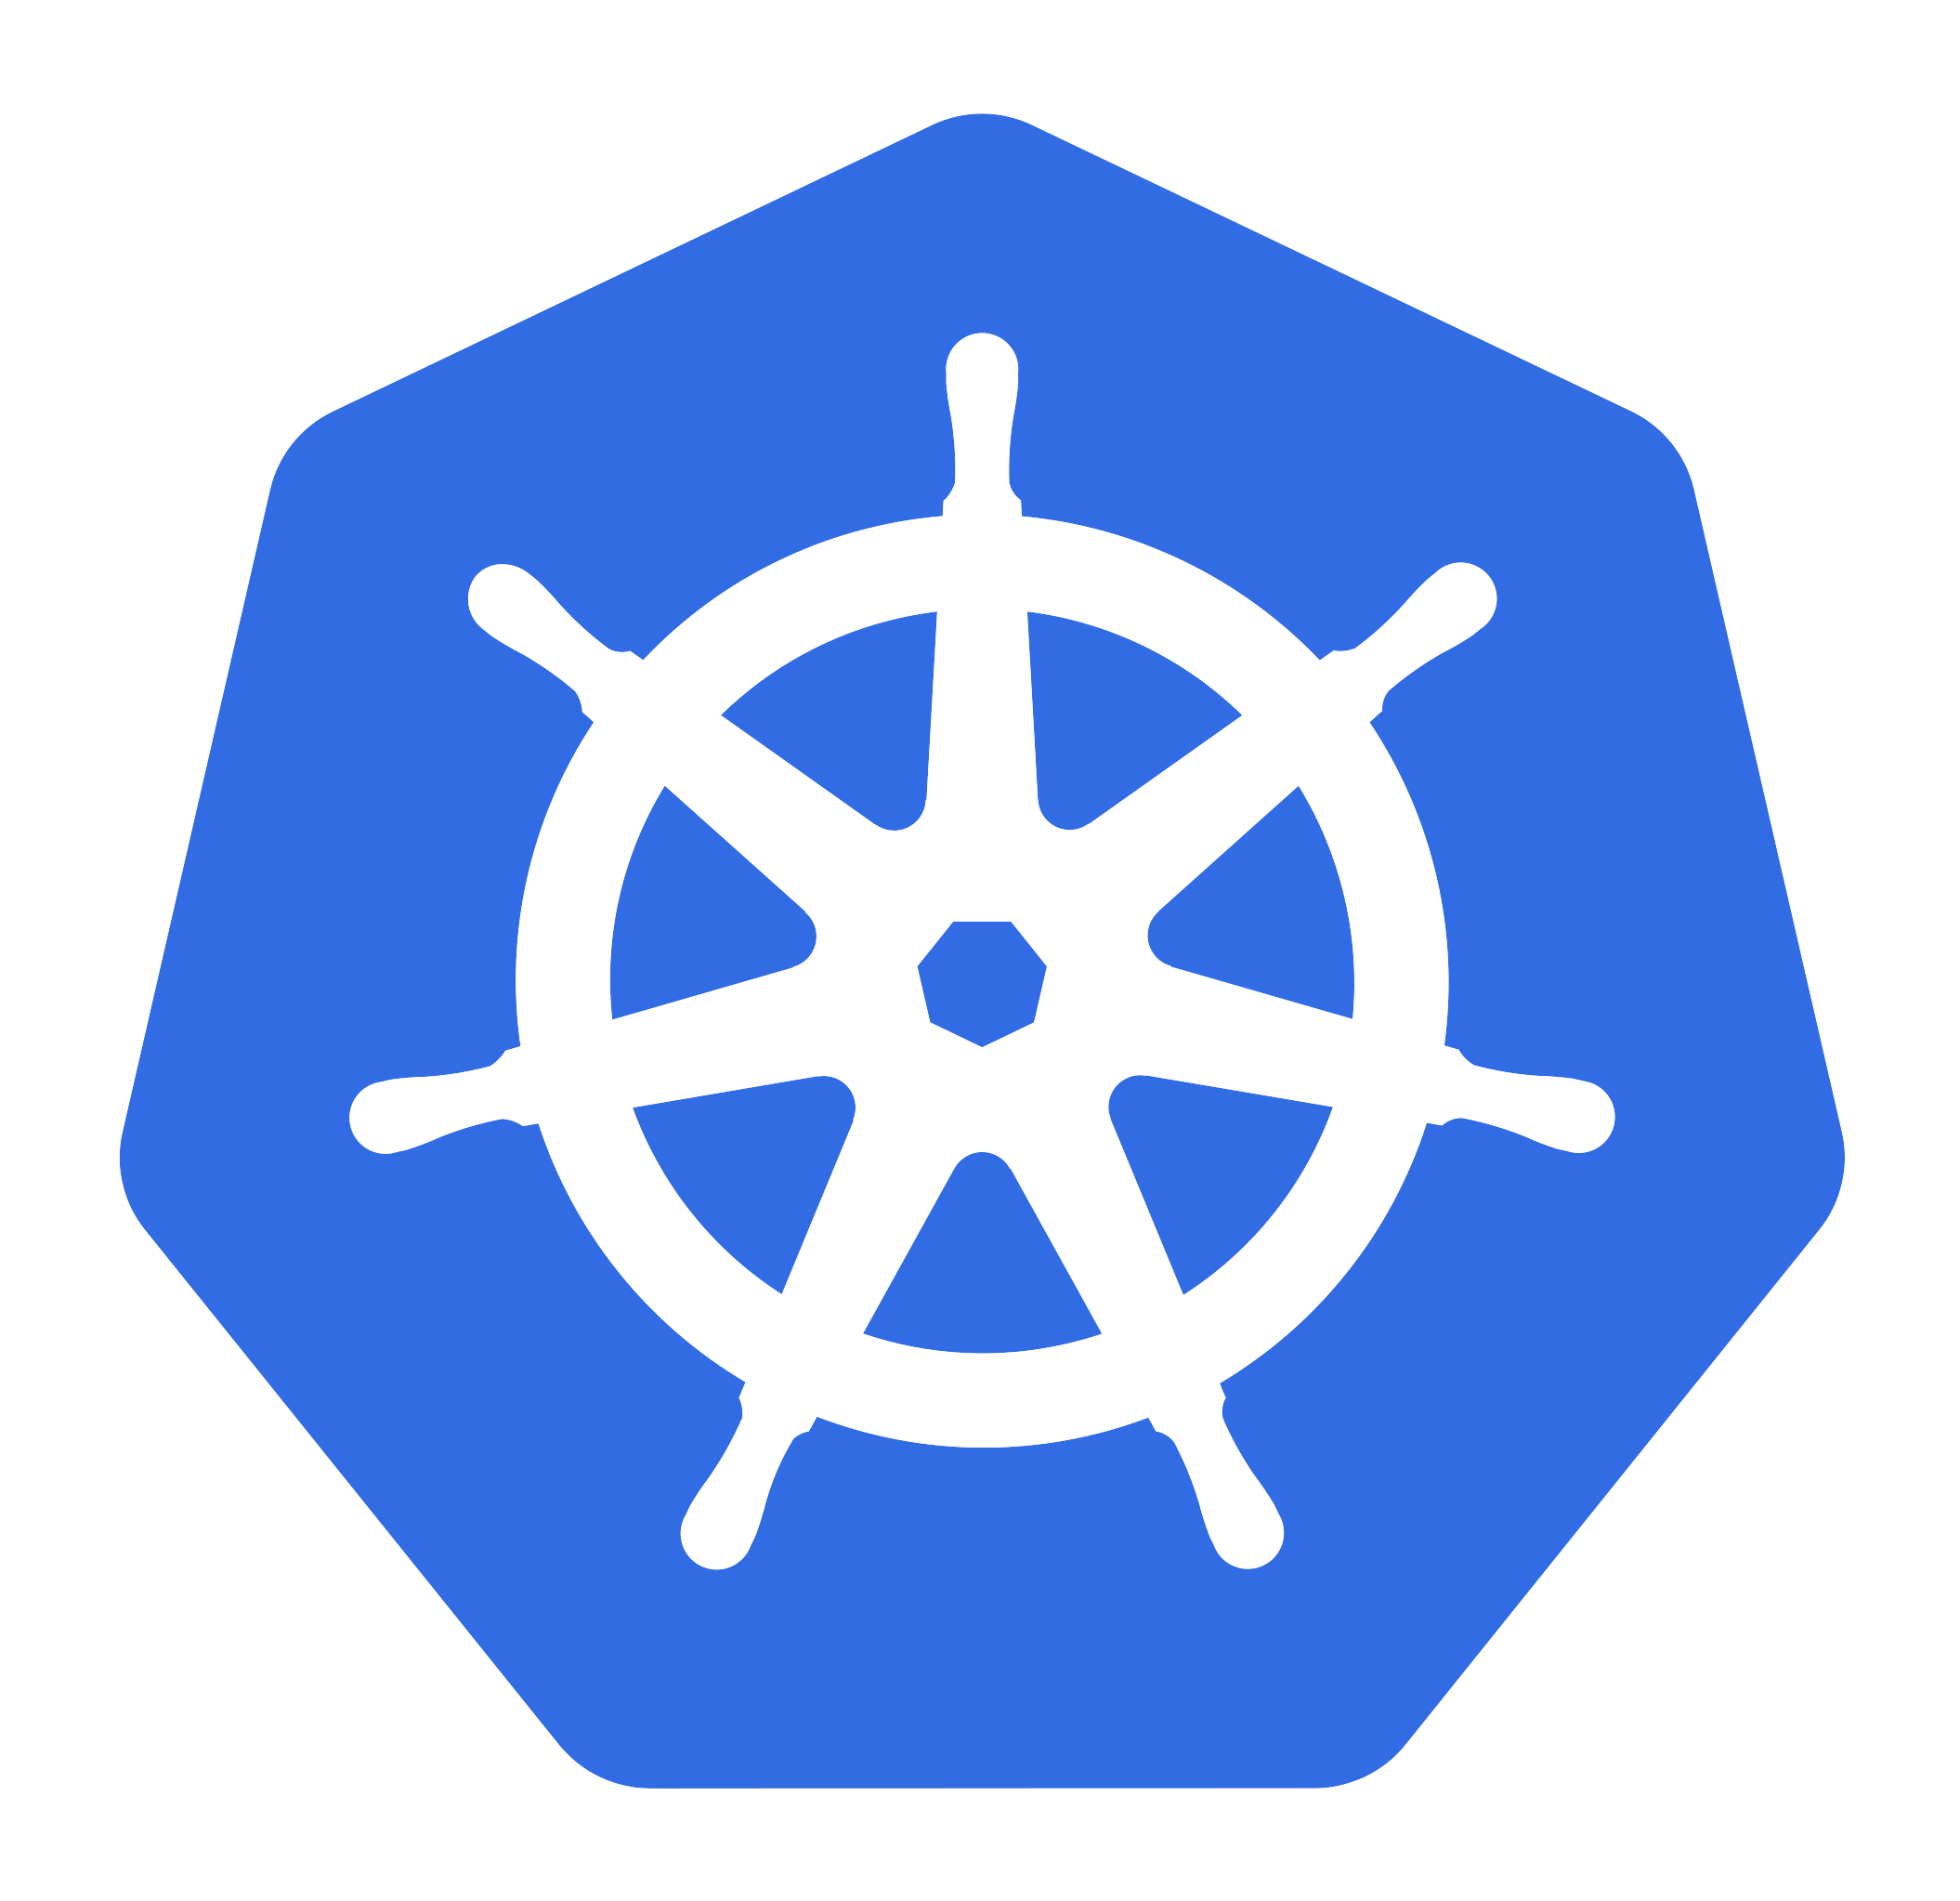 Kubernetes-icon-color.svg